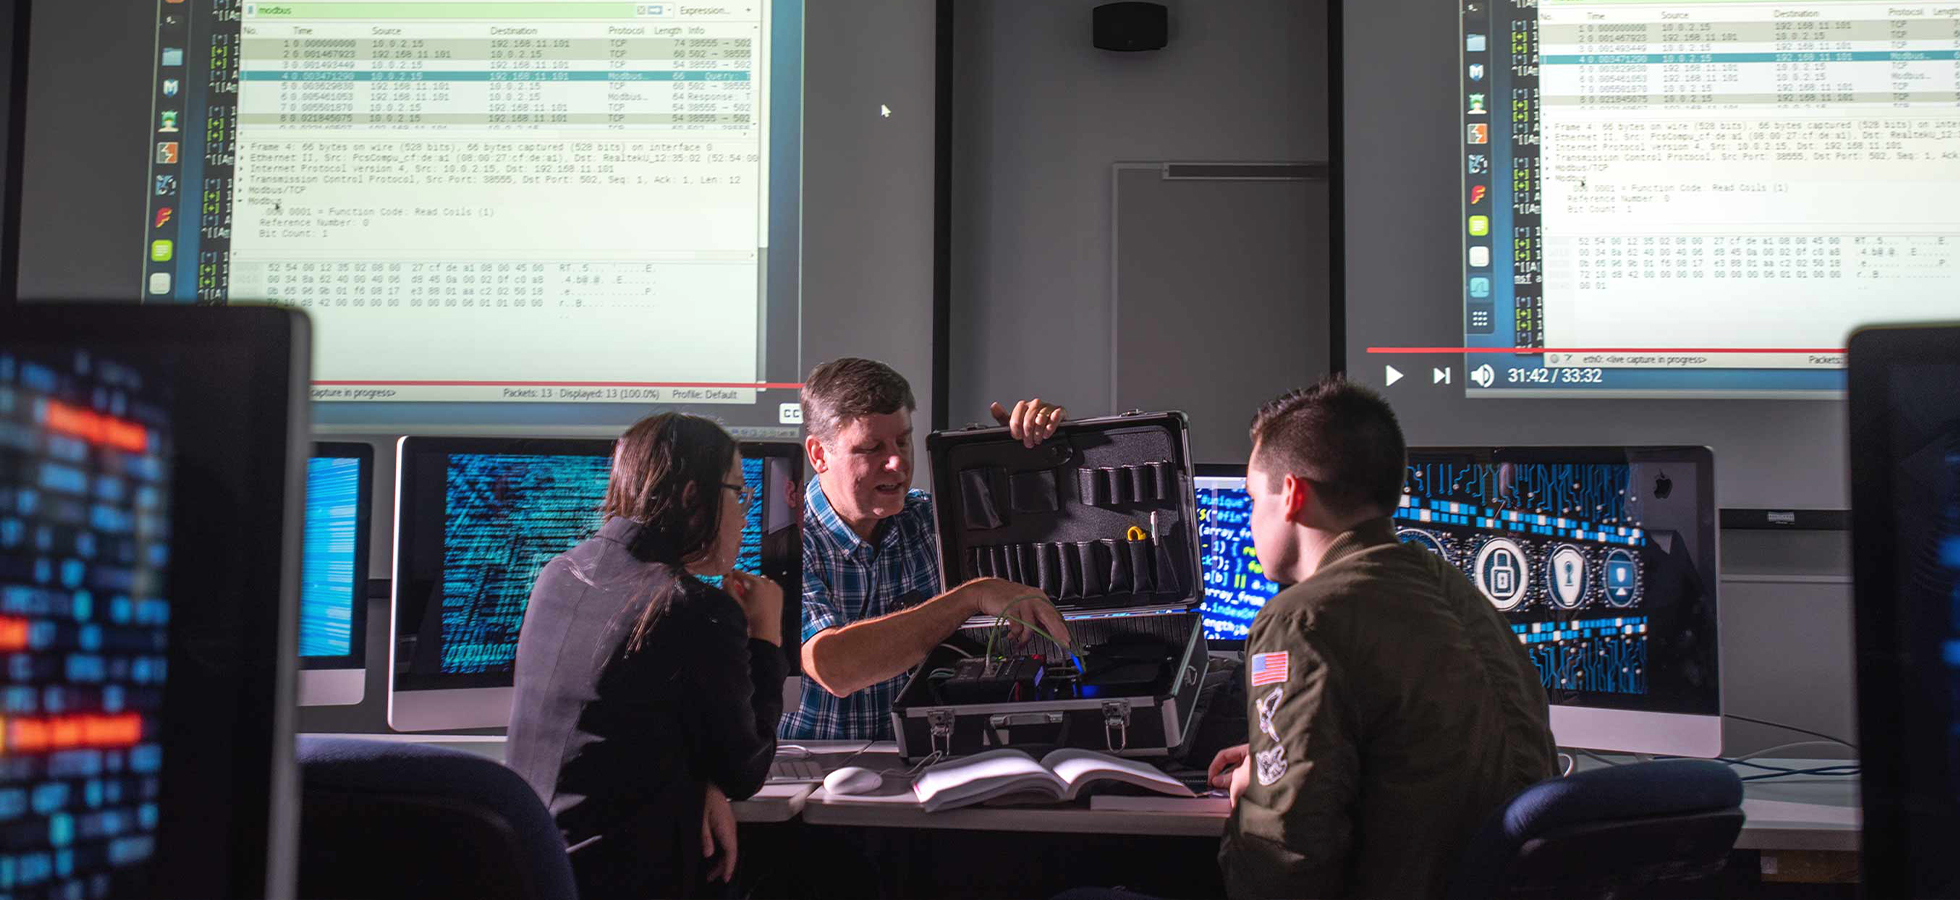 Assumption University Cybersecurity Program is validated by the U.S. National Security Agency. The cybersecurity program in the Worcester, MA area.